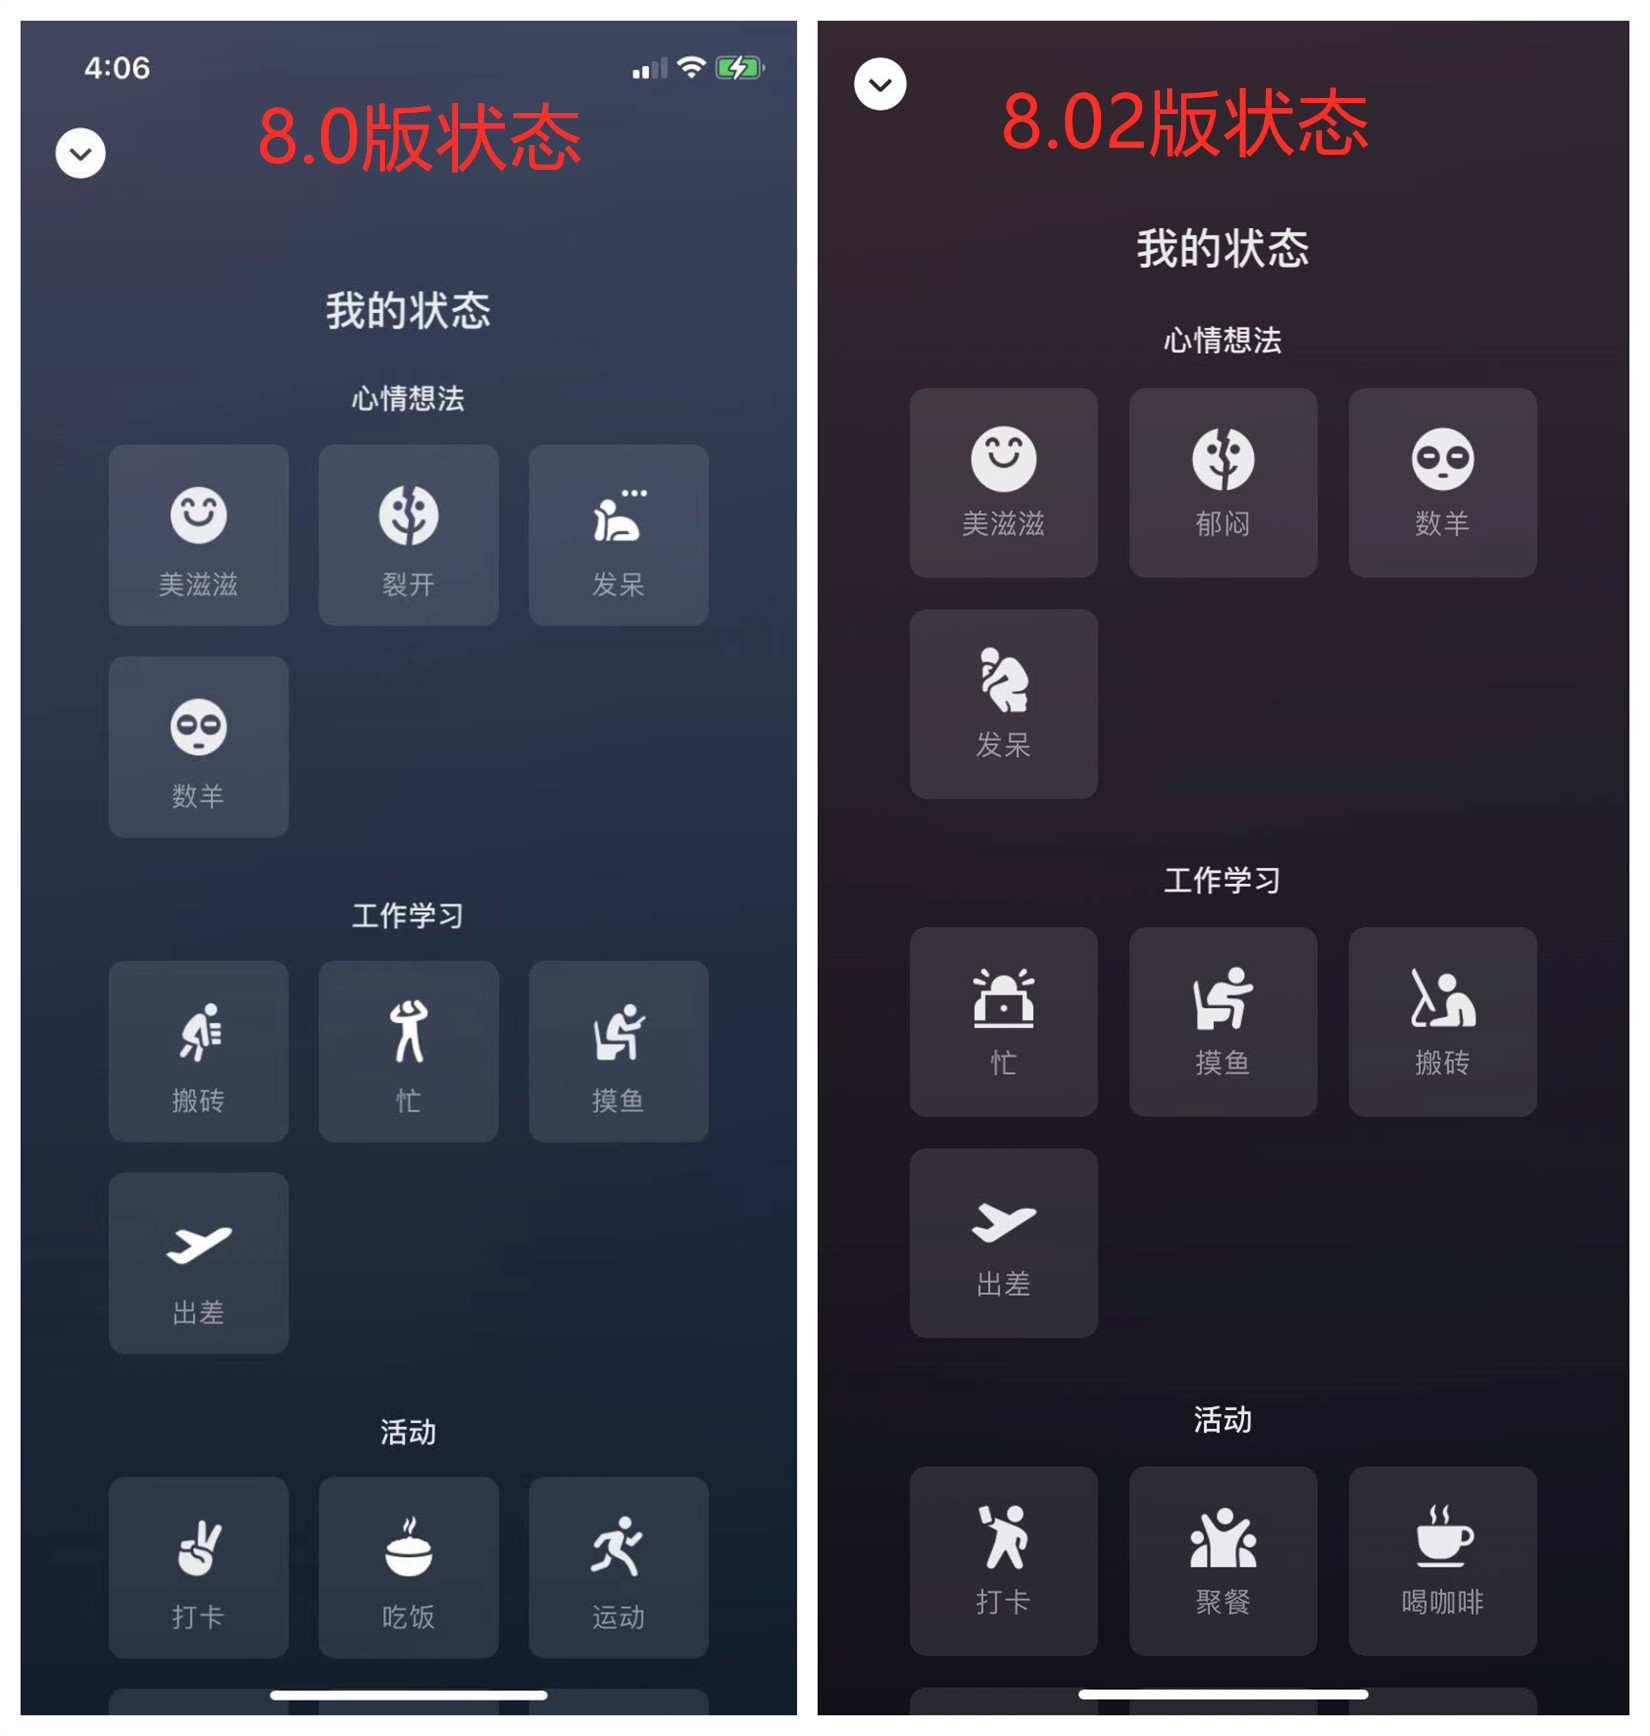 Small letter 8.02 release! Support of red bag cover is private order make, these 6 functions had new change